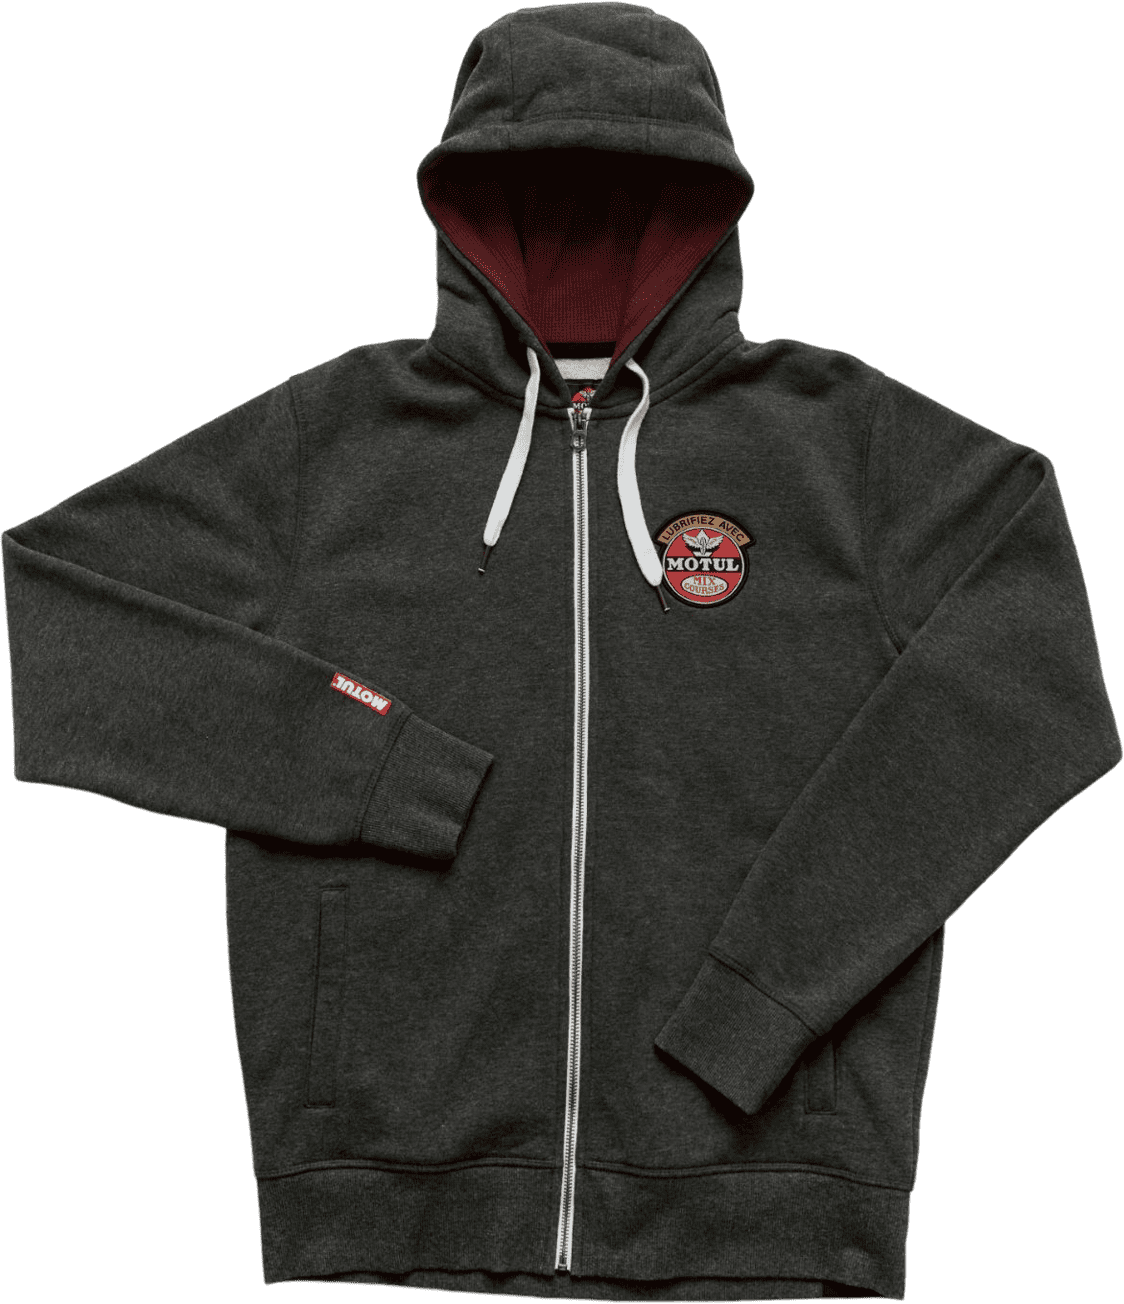 207972 MOTUL hoodie sweatshirt with zipped front featuring the MOTUL logo embroidered on the front whilst the sleeves feature tiny labels.